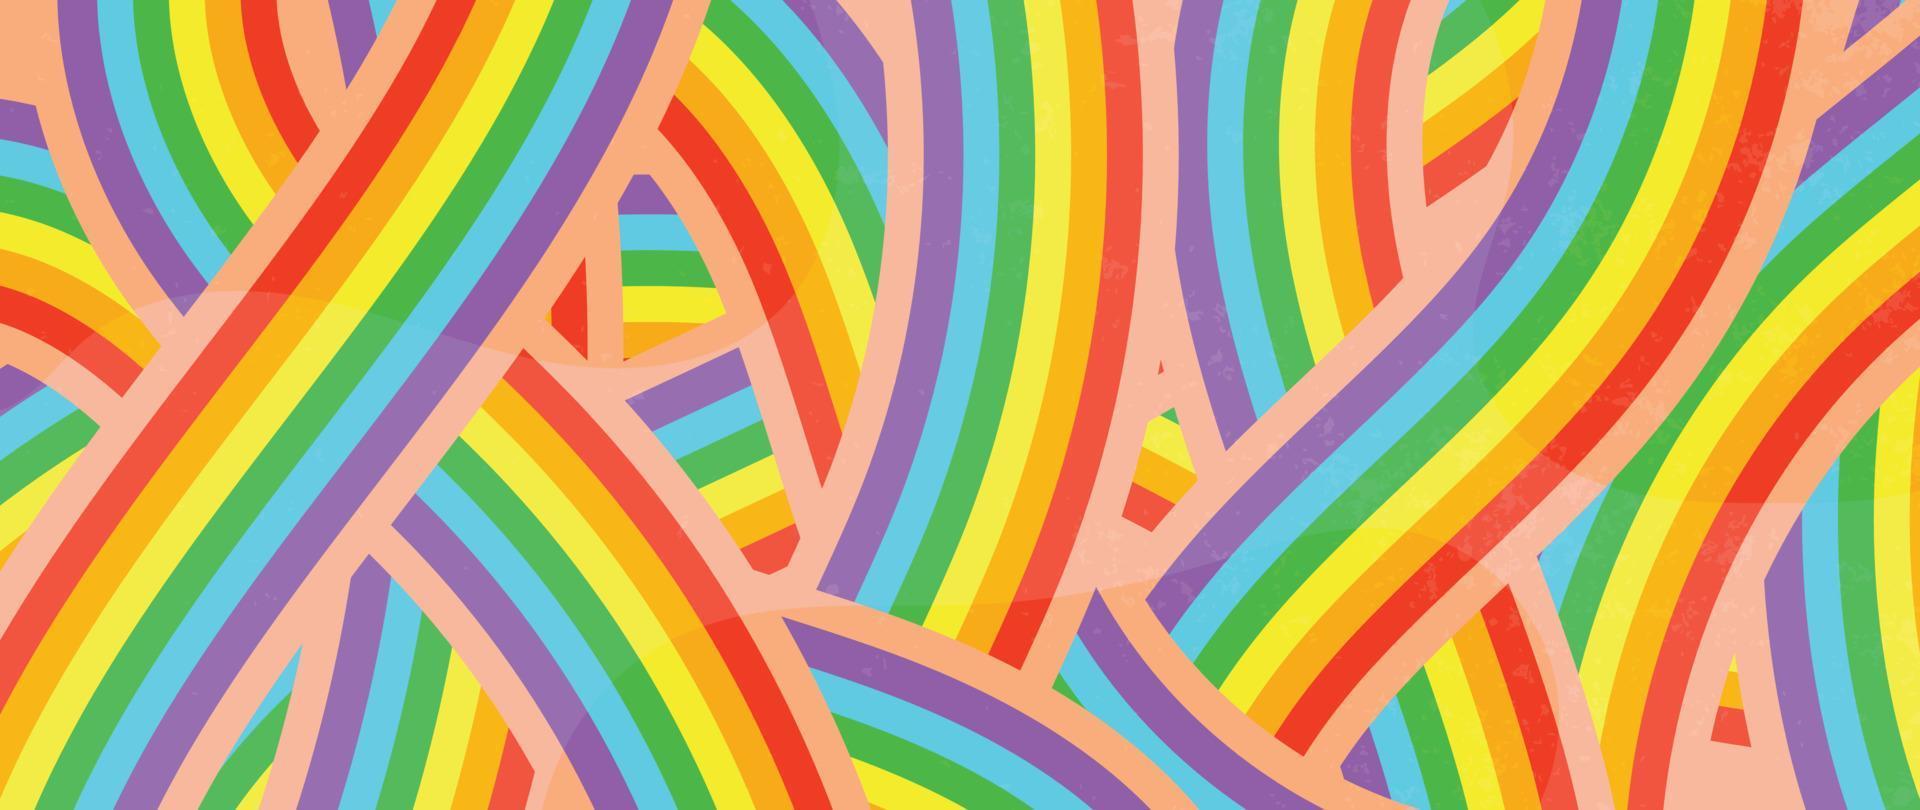 Happy Pride month background. LGBTQ community symbols with rainbow ribbons, grunge texture. Design for celebration against violence, bisexual, transgender, gender equality, rights concept. vector